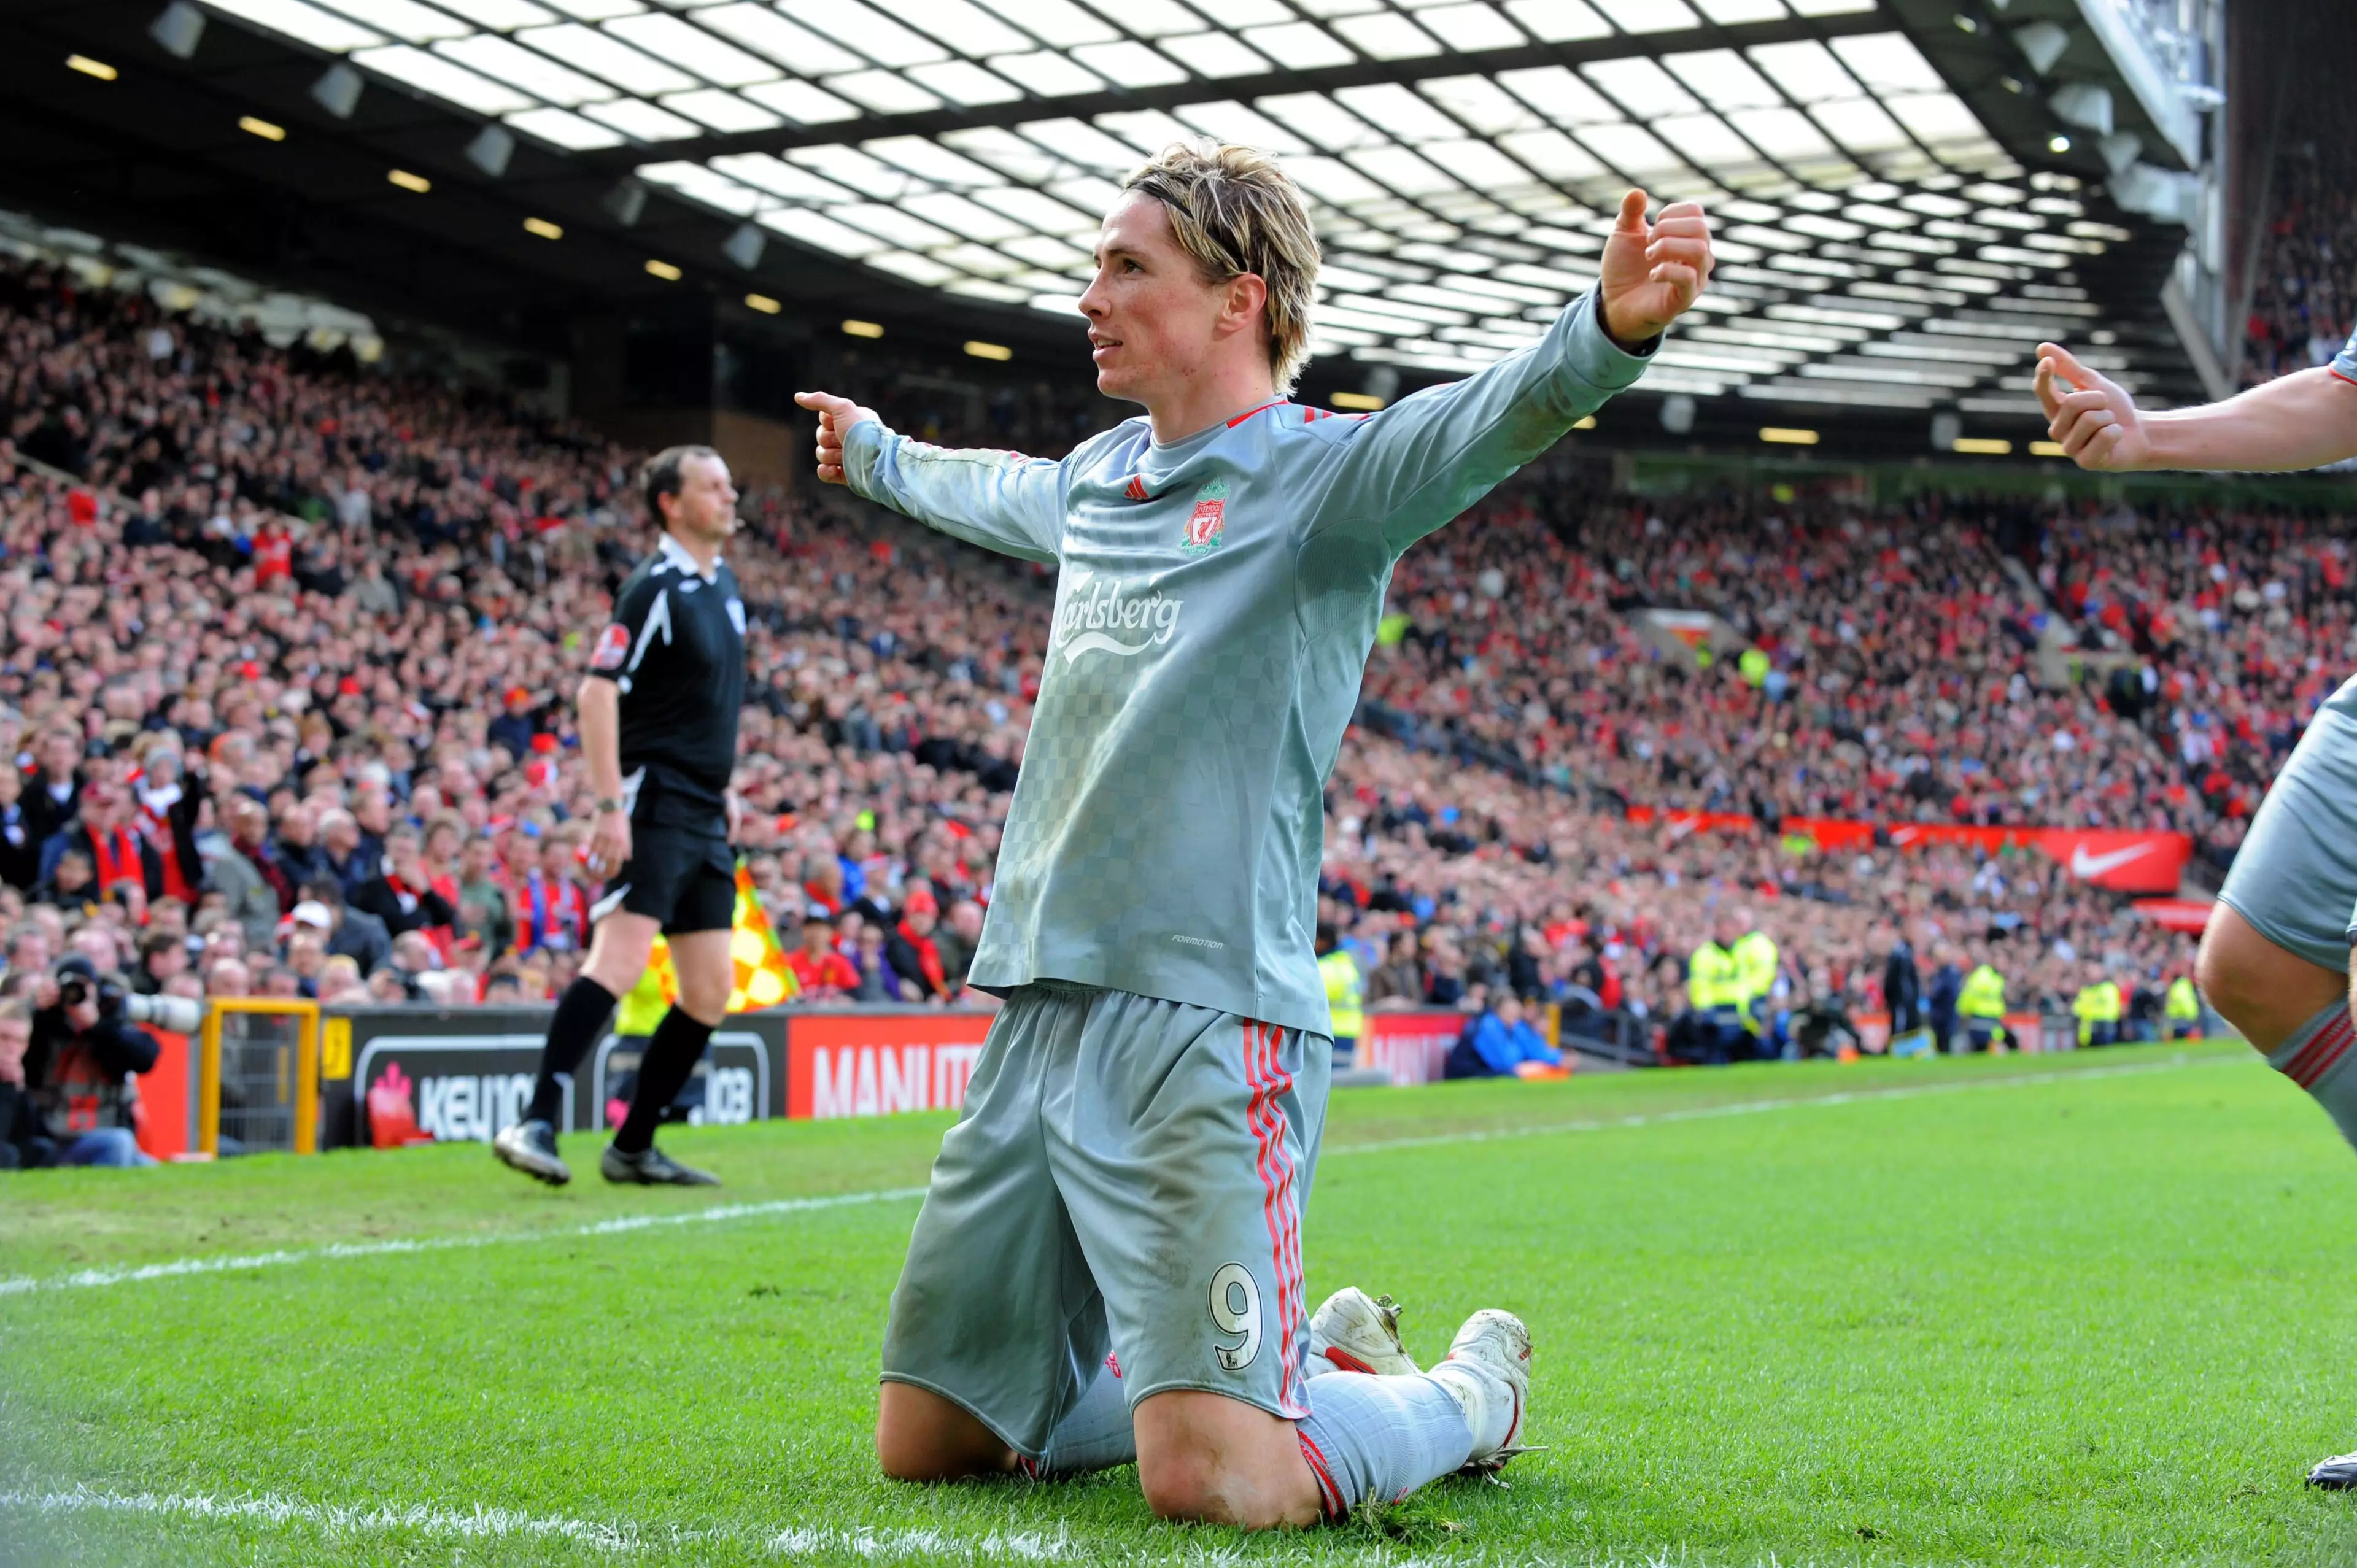 Torres celebrates at Old Trafford as Liverpool hunt down a title. Image: PA Images